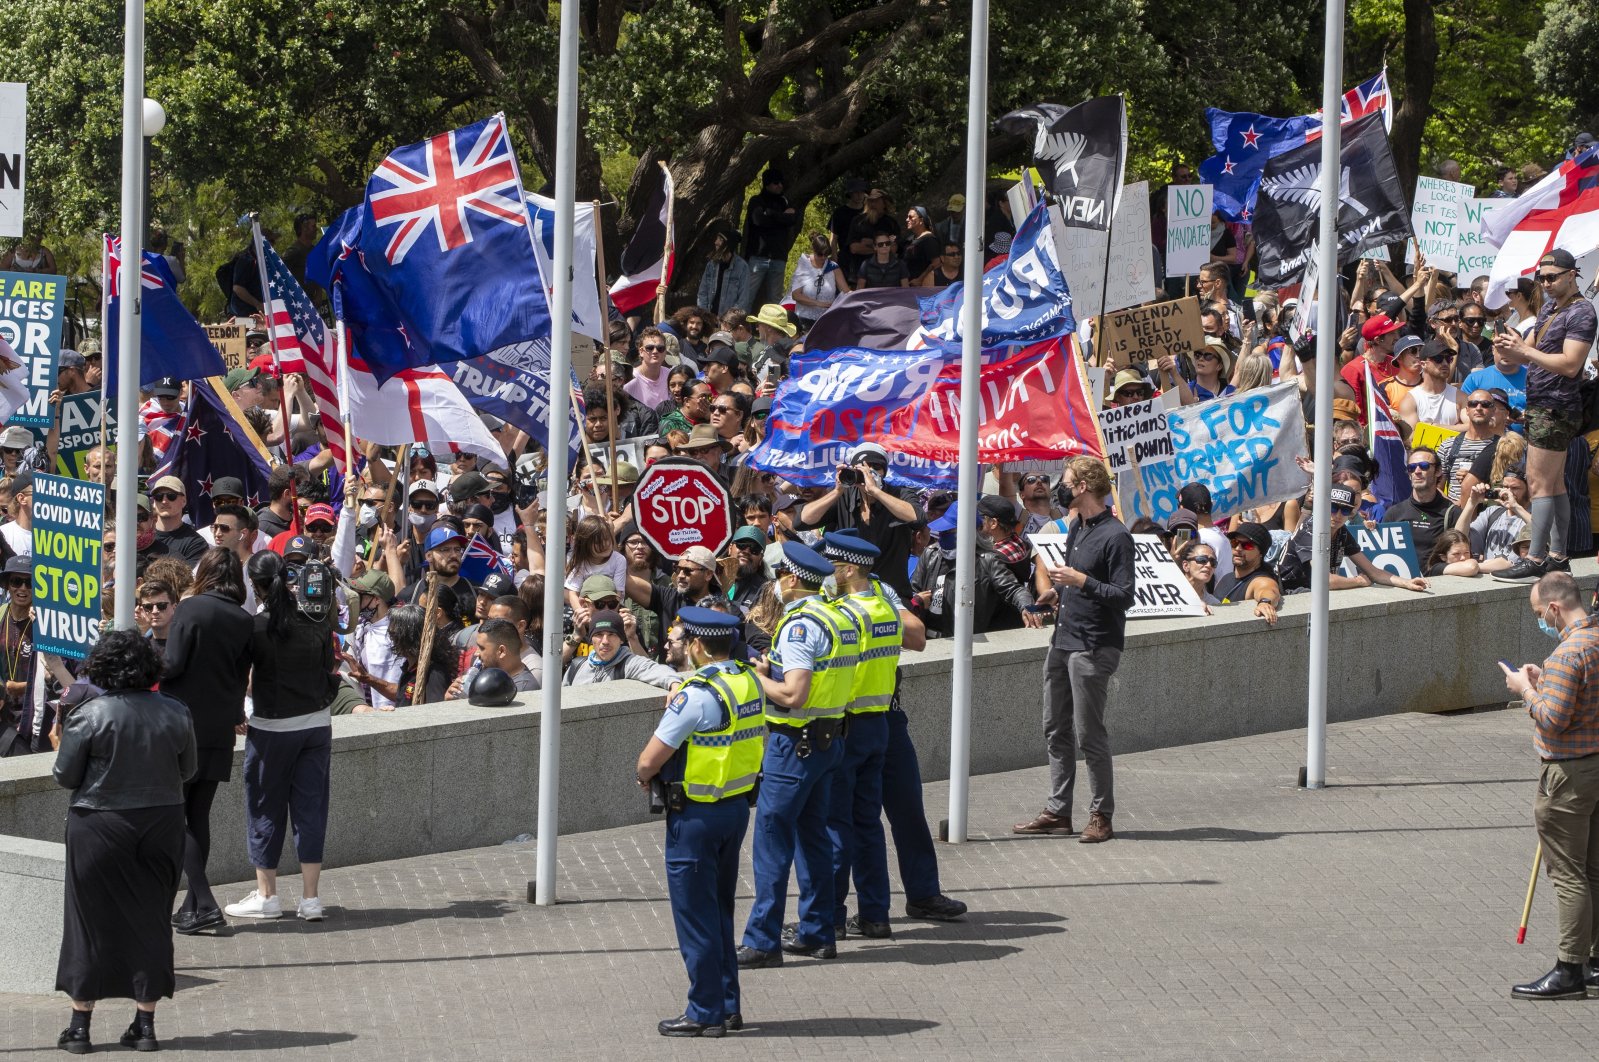 Police watch as the Freedom and Rights Coalition protesters gather at parliament, in Wellington, New Zealand, Nov. 9, 2021. (AP Photo)